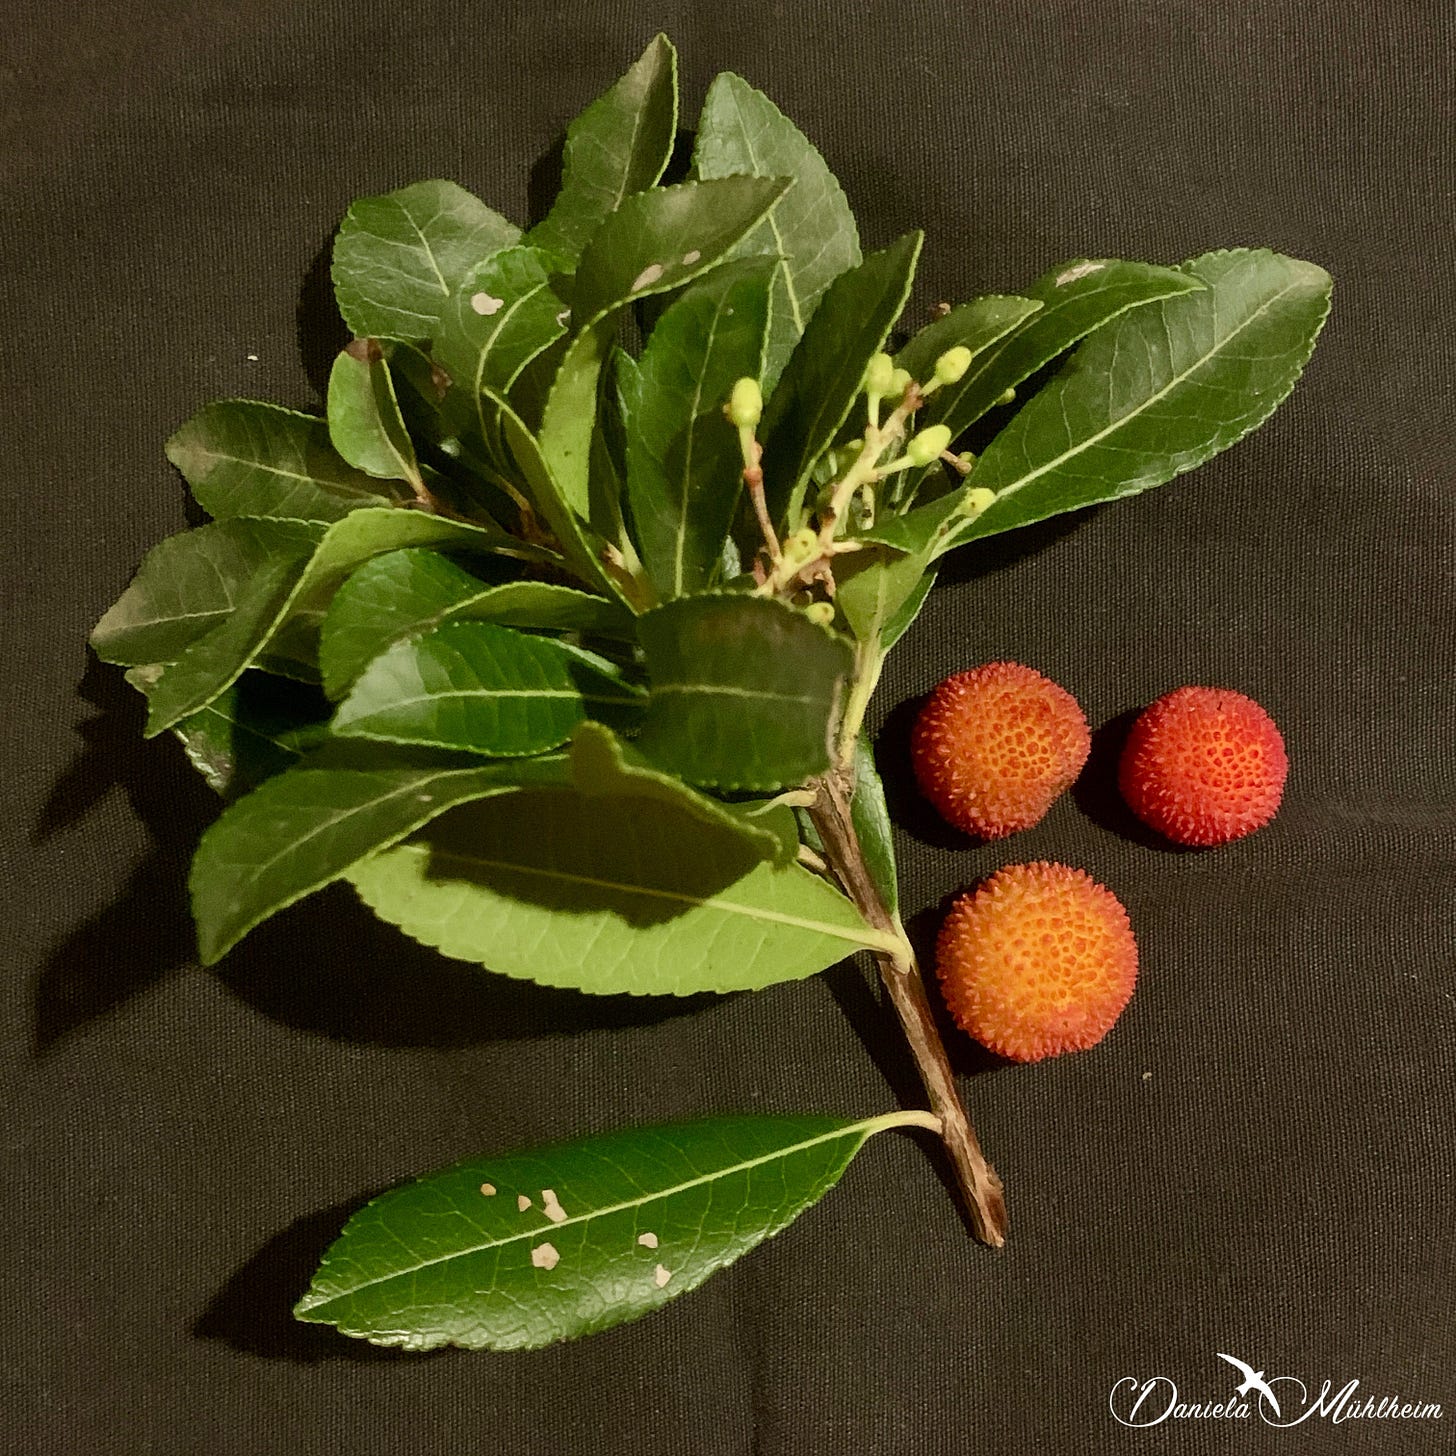 Strawberry tree fruit and leaves and flower buds